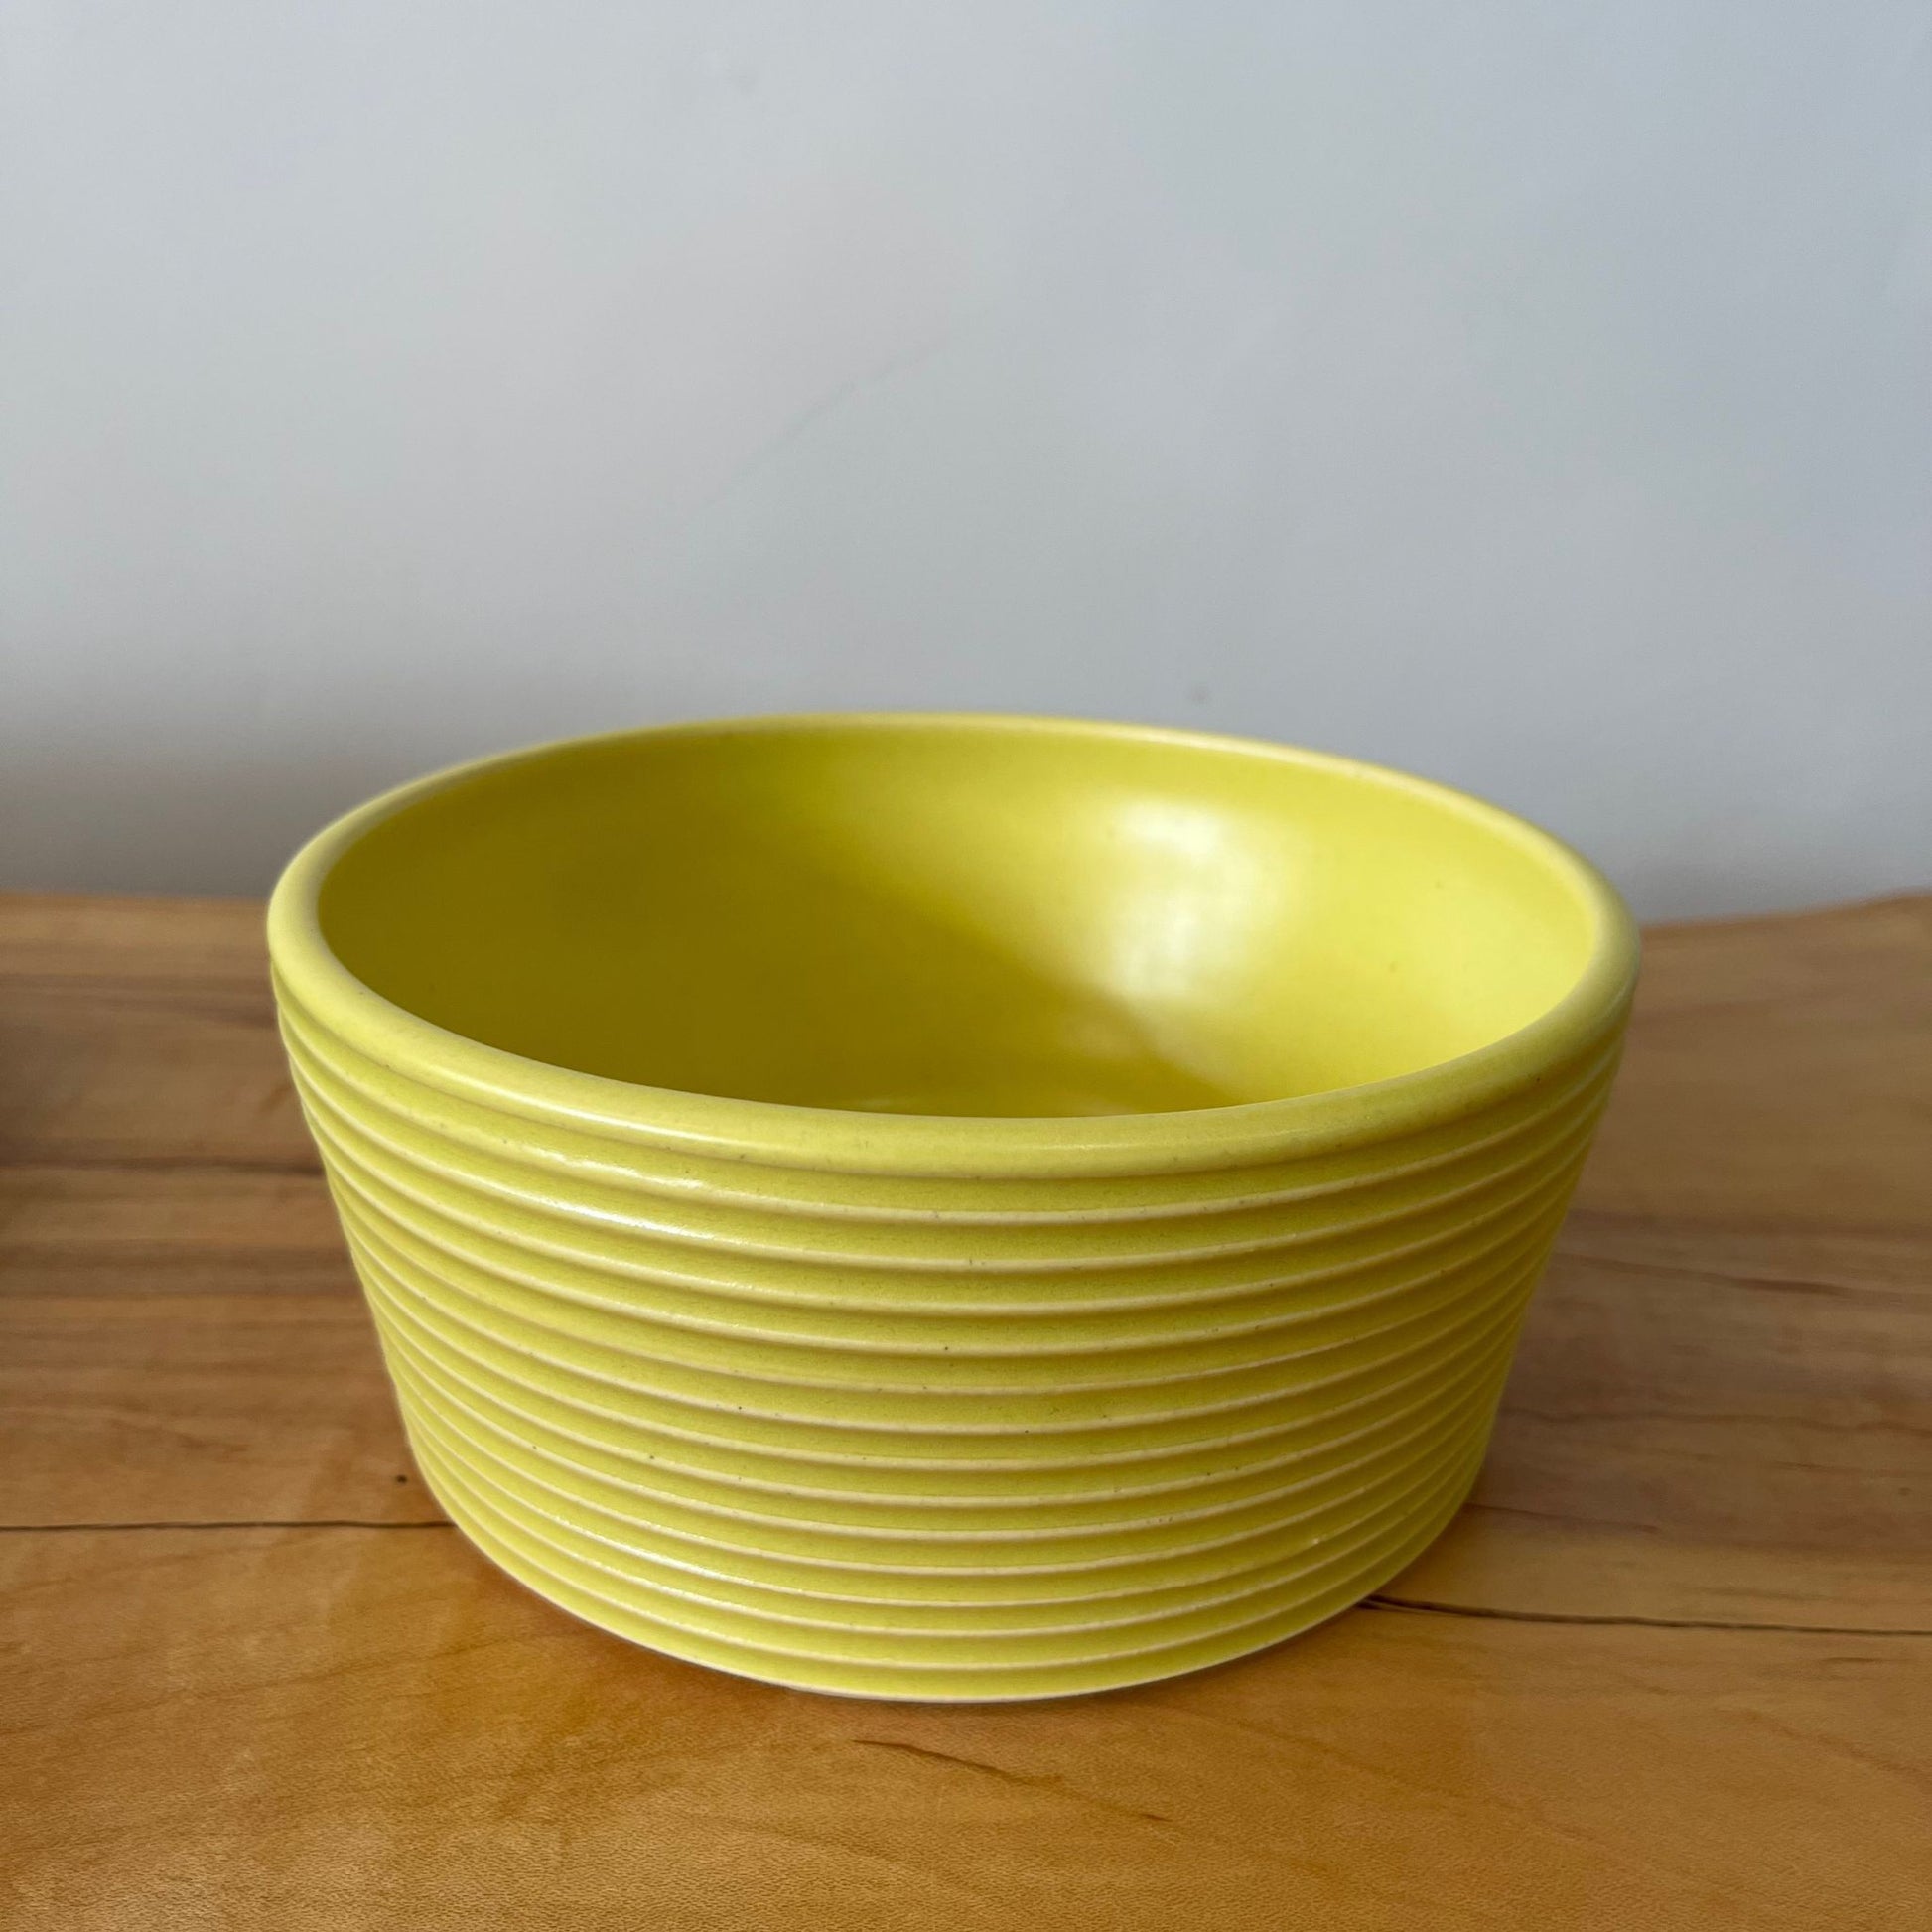 Wheel-thrown ribbed ceramic stoneware dinner bowl with handmade glaze in yellow/ zest color. 6" x 2.5"